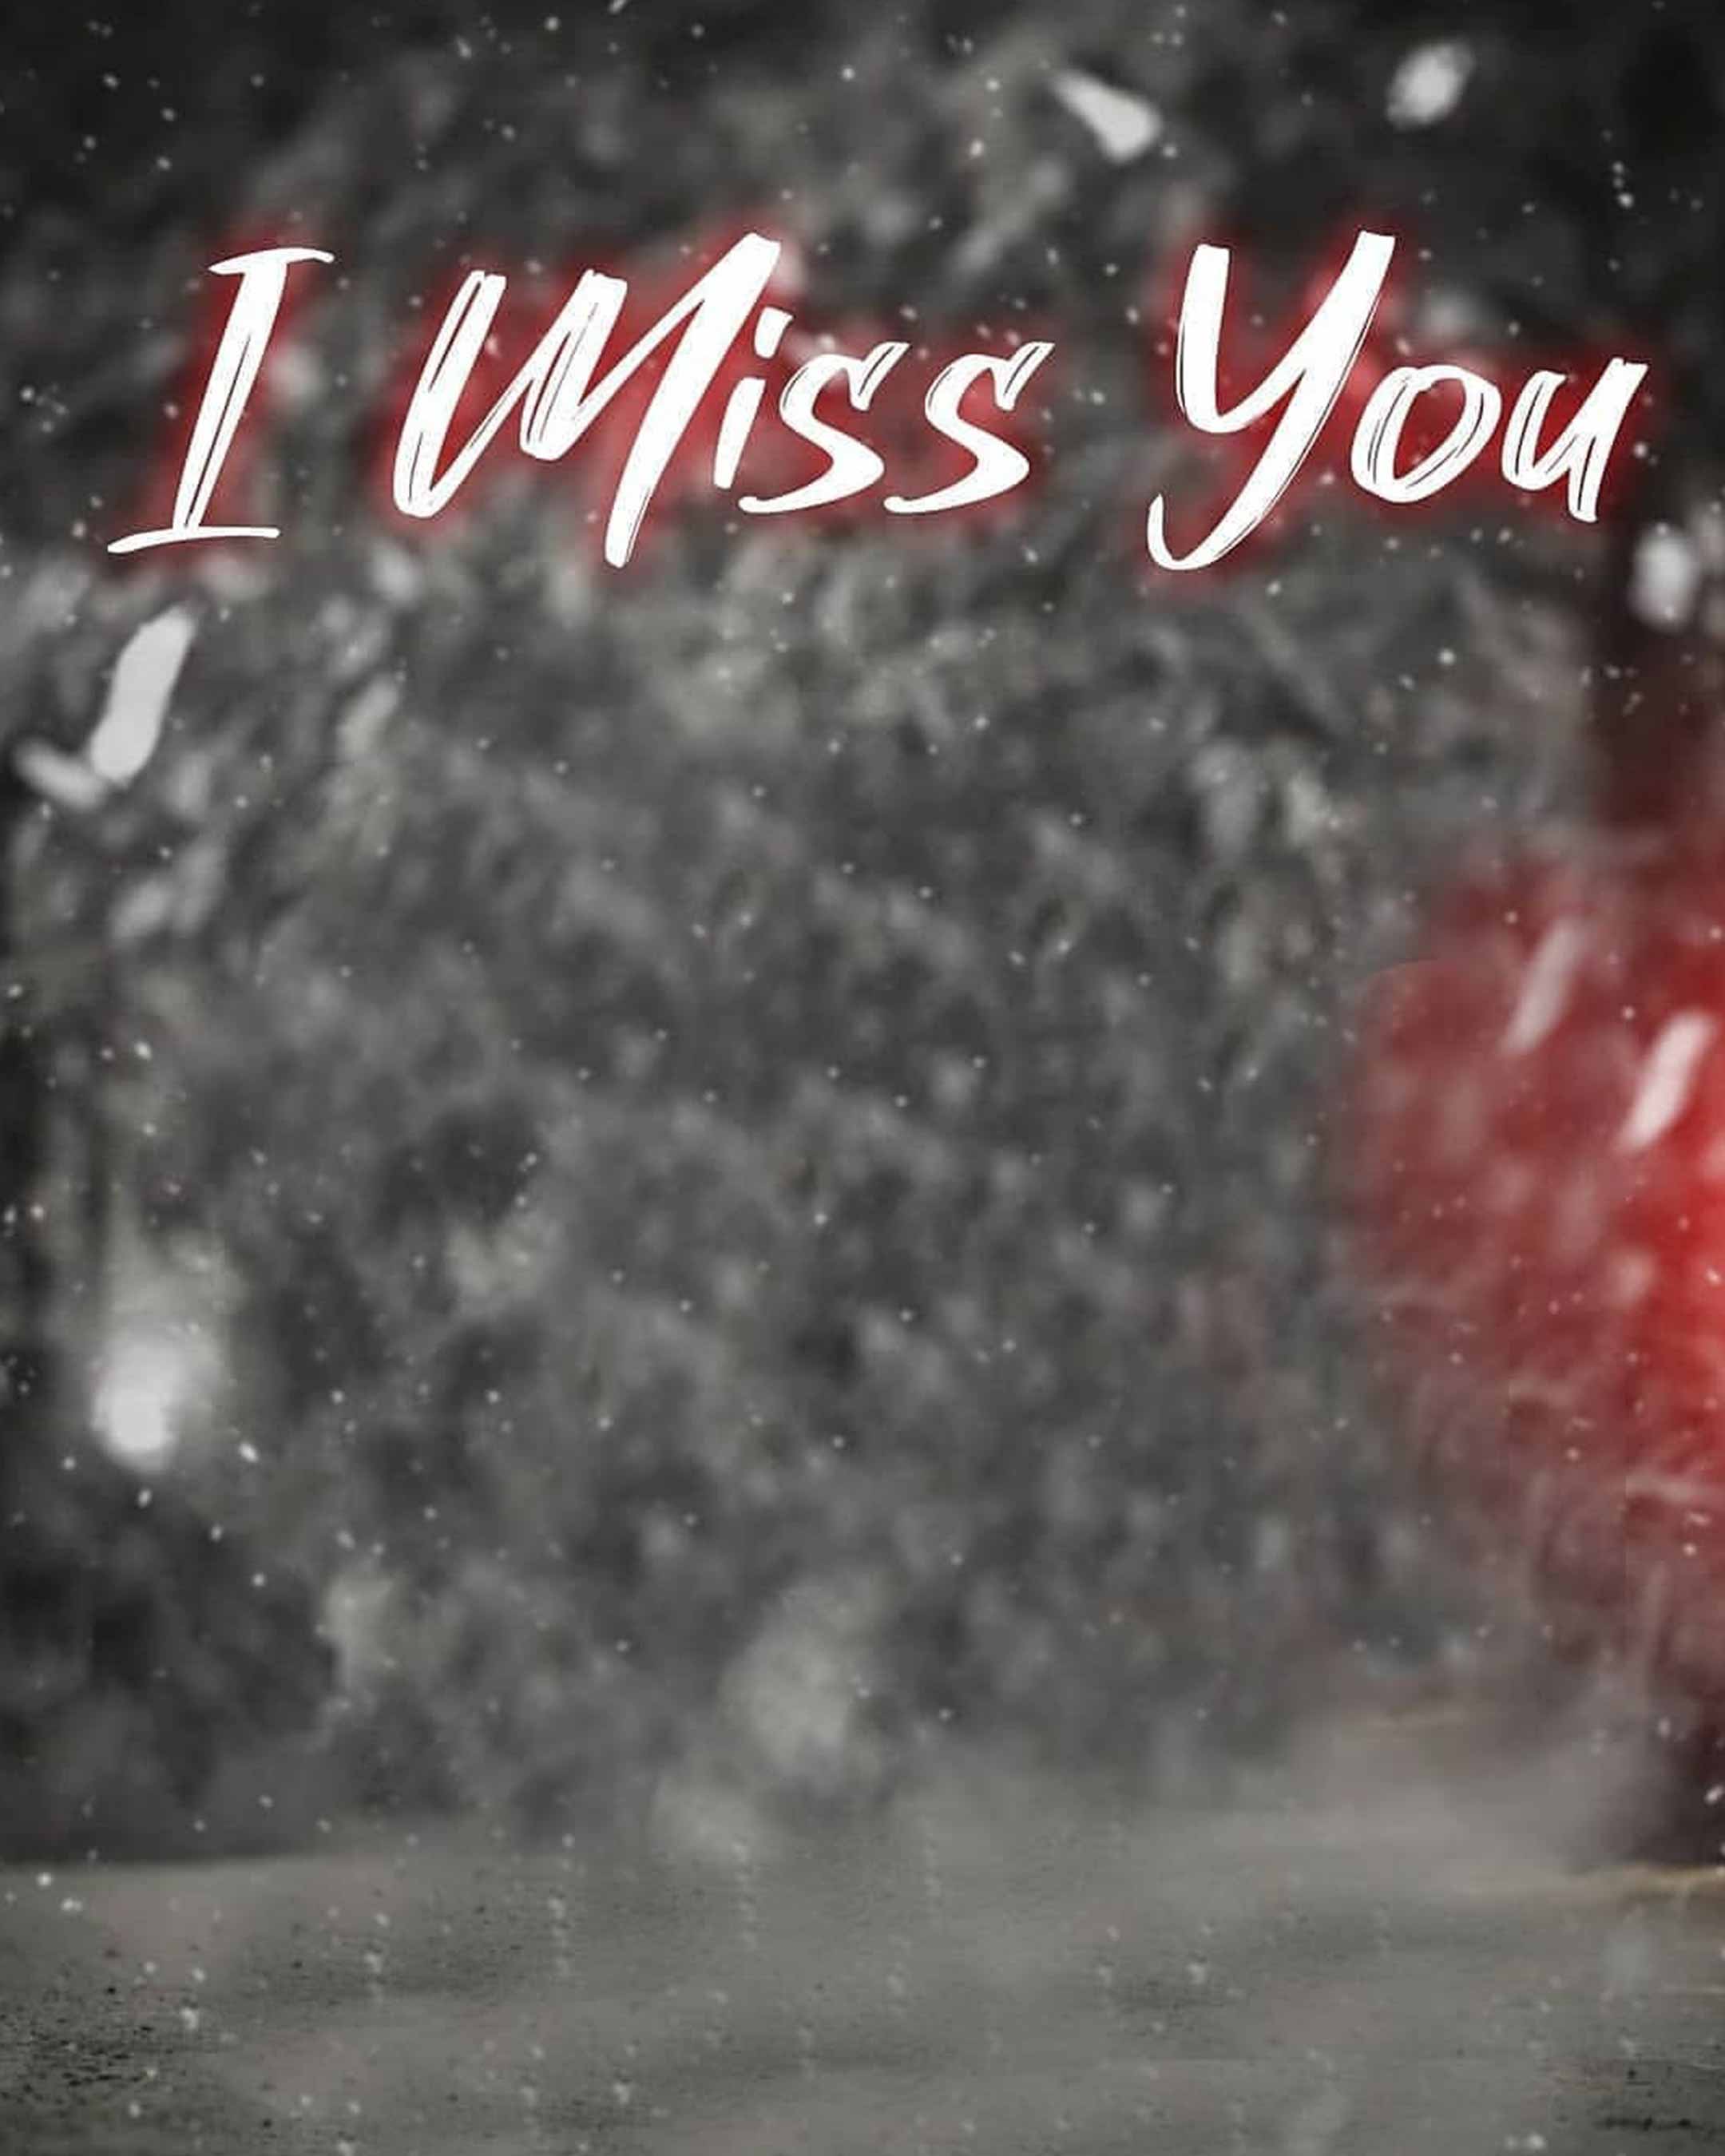 I Miss You Snapseed Background Free Stock Image